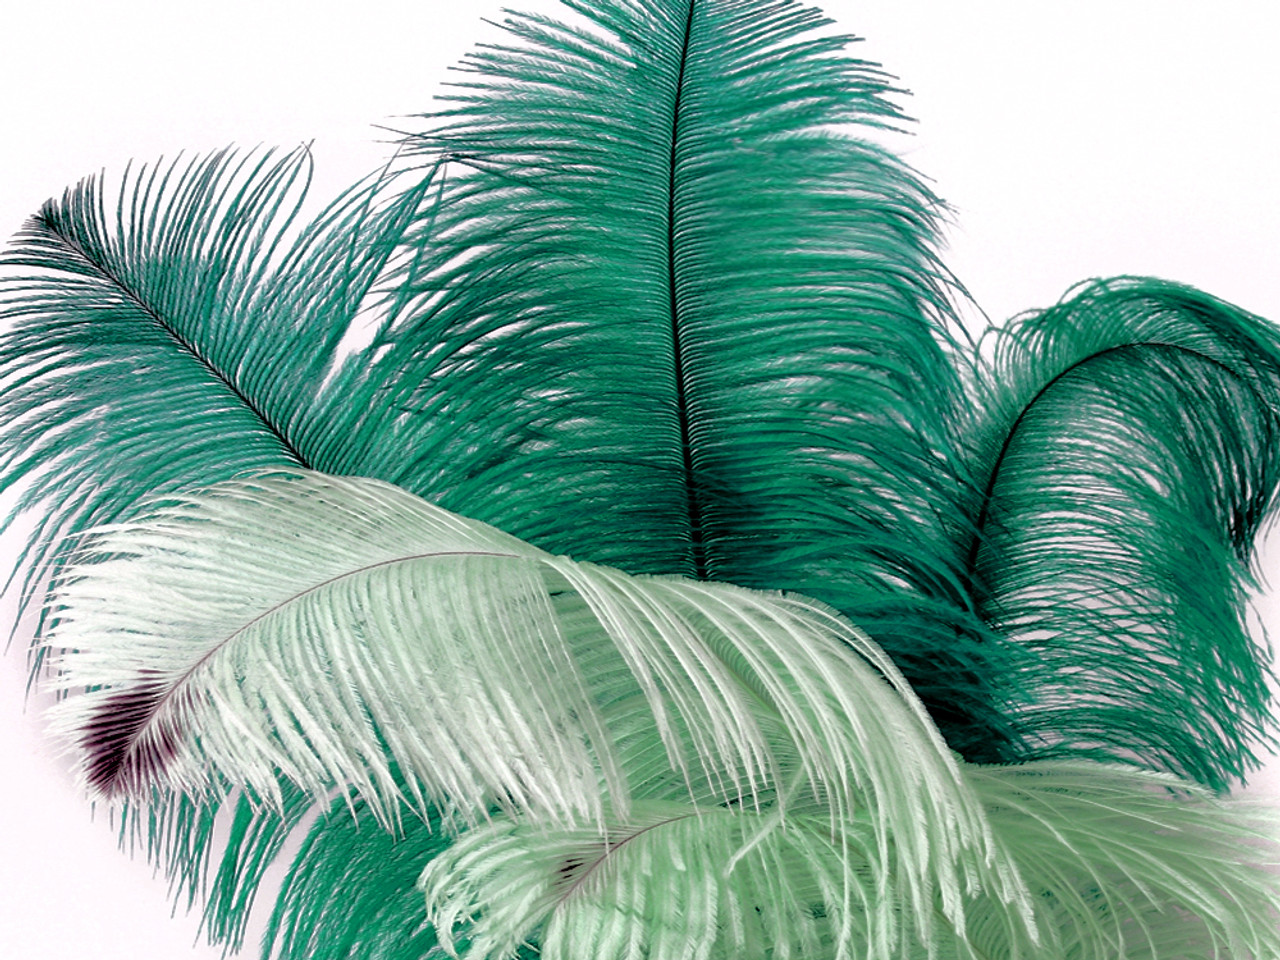 Bulk Wholesale Ostrich Feathers Tail Plumes 15-20 1/2 Lb. of Ostrich  Feathers 100 Pcs. or More 